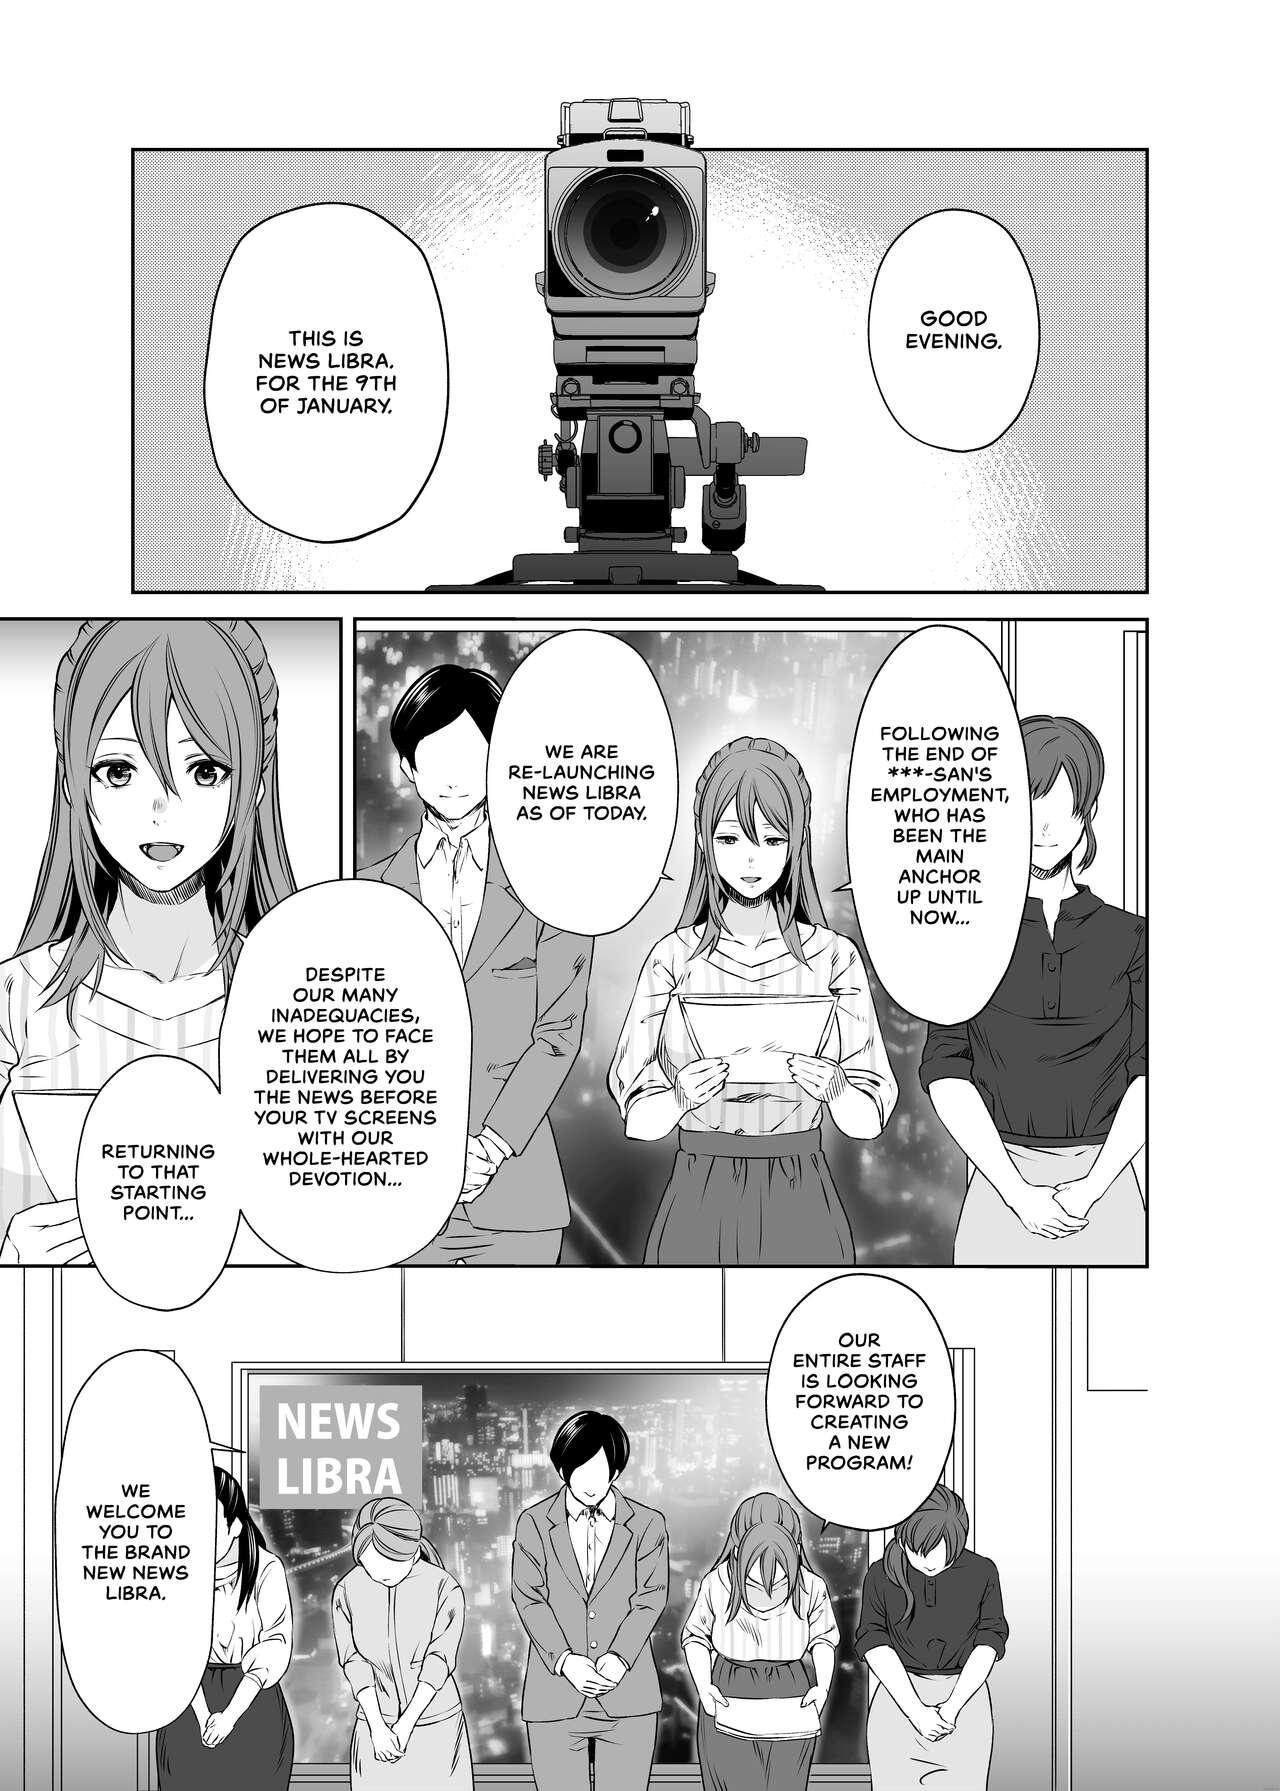 Thot [Remora Works (Meriko)] LesFes Co -Candid Reporting- Vol. 003 [English] - Original Amateur - Page 4